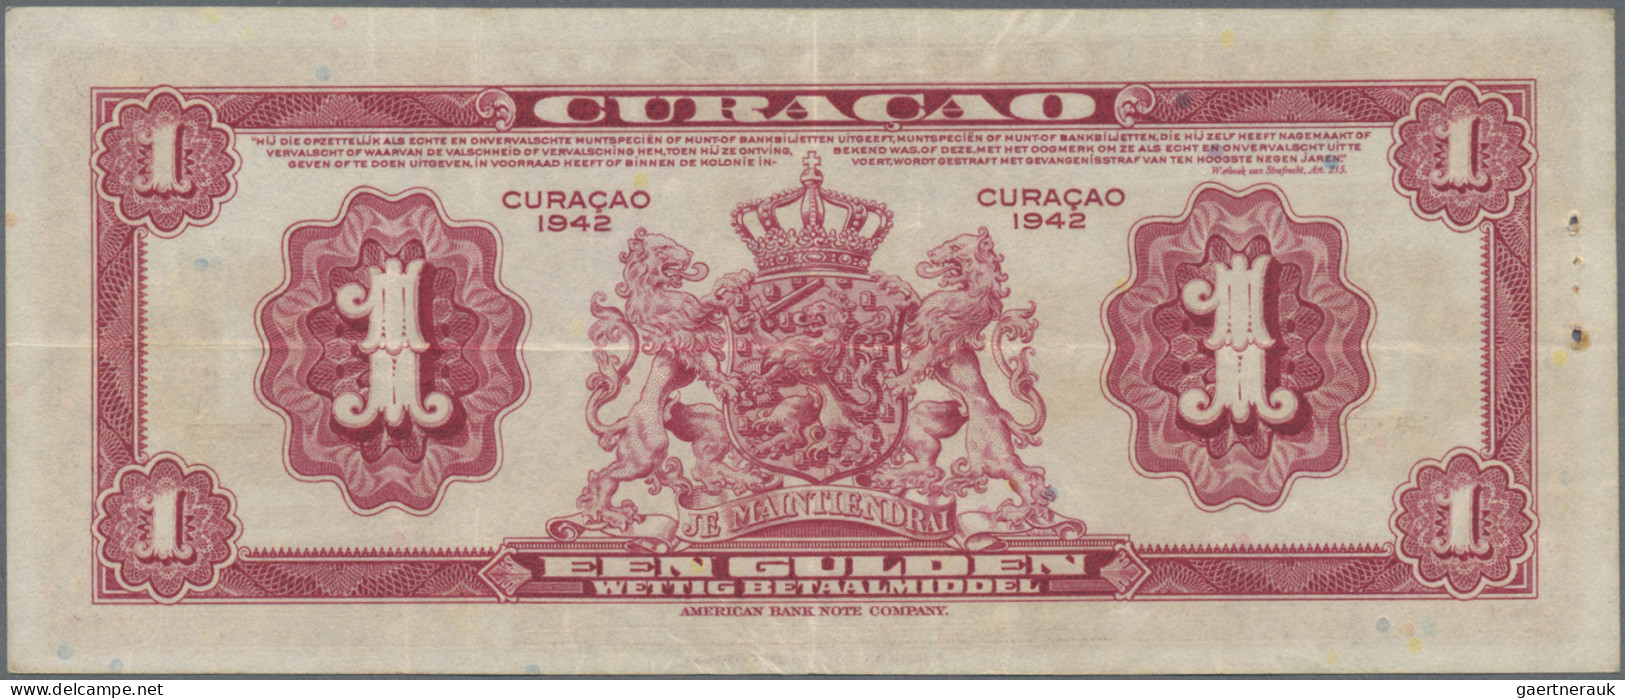 Curacao: De Curacaosche Bank, Nice Set With 5 Banknotes, 1930-1942 Series, With - Other - America